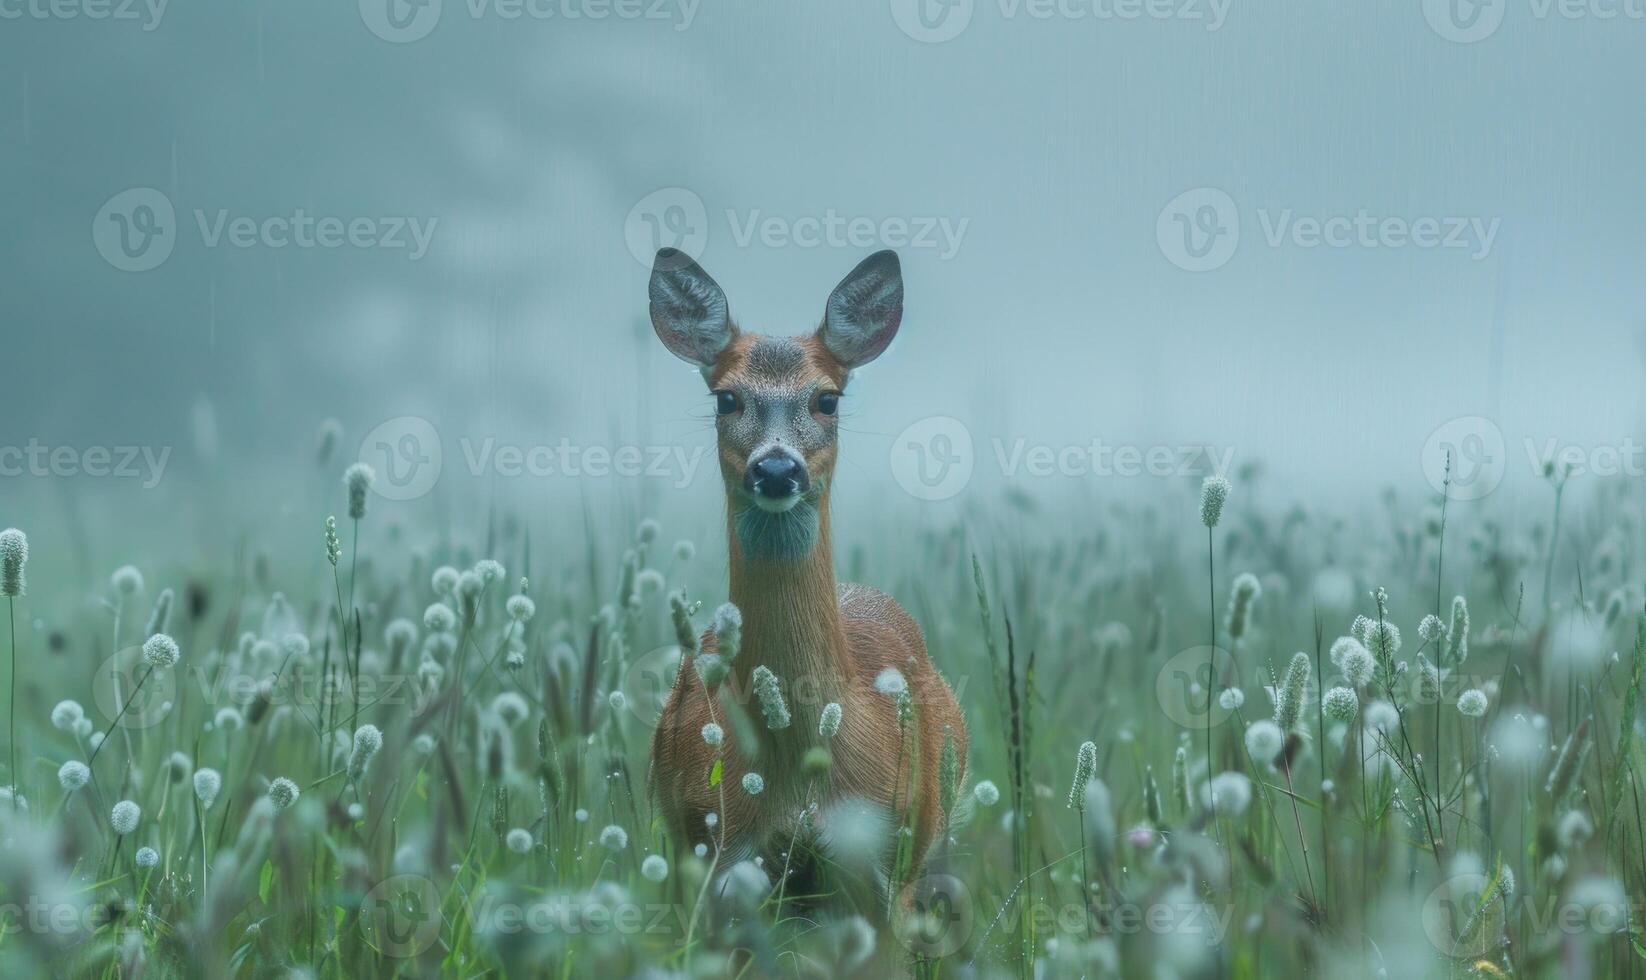 Fallow deer in a foggy field with dry grass and wild flowers photo